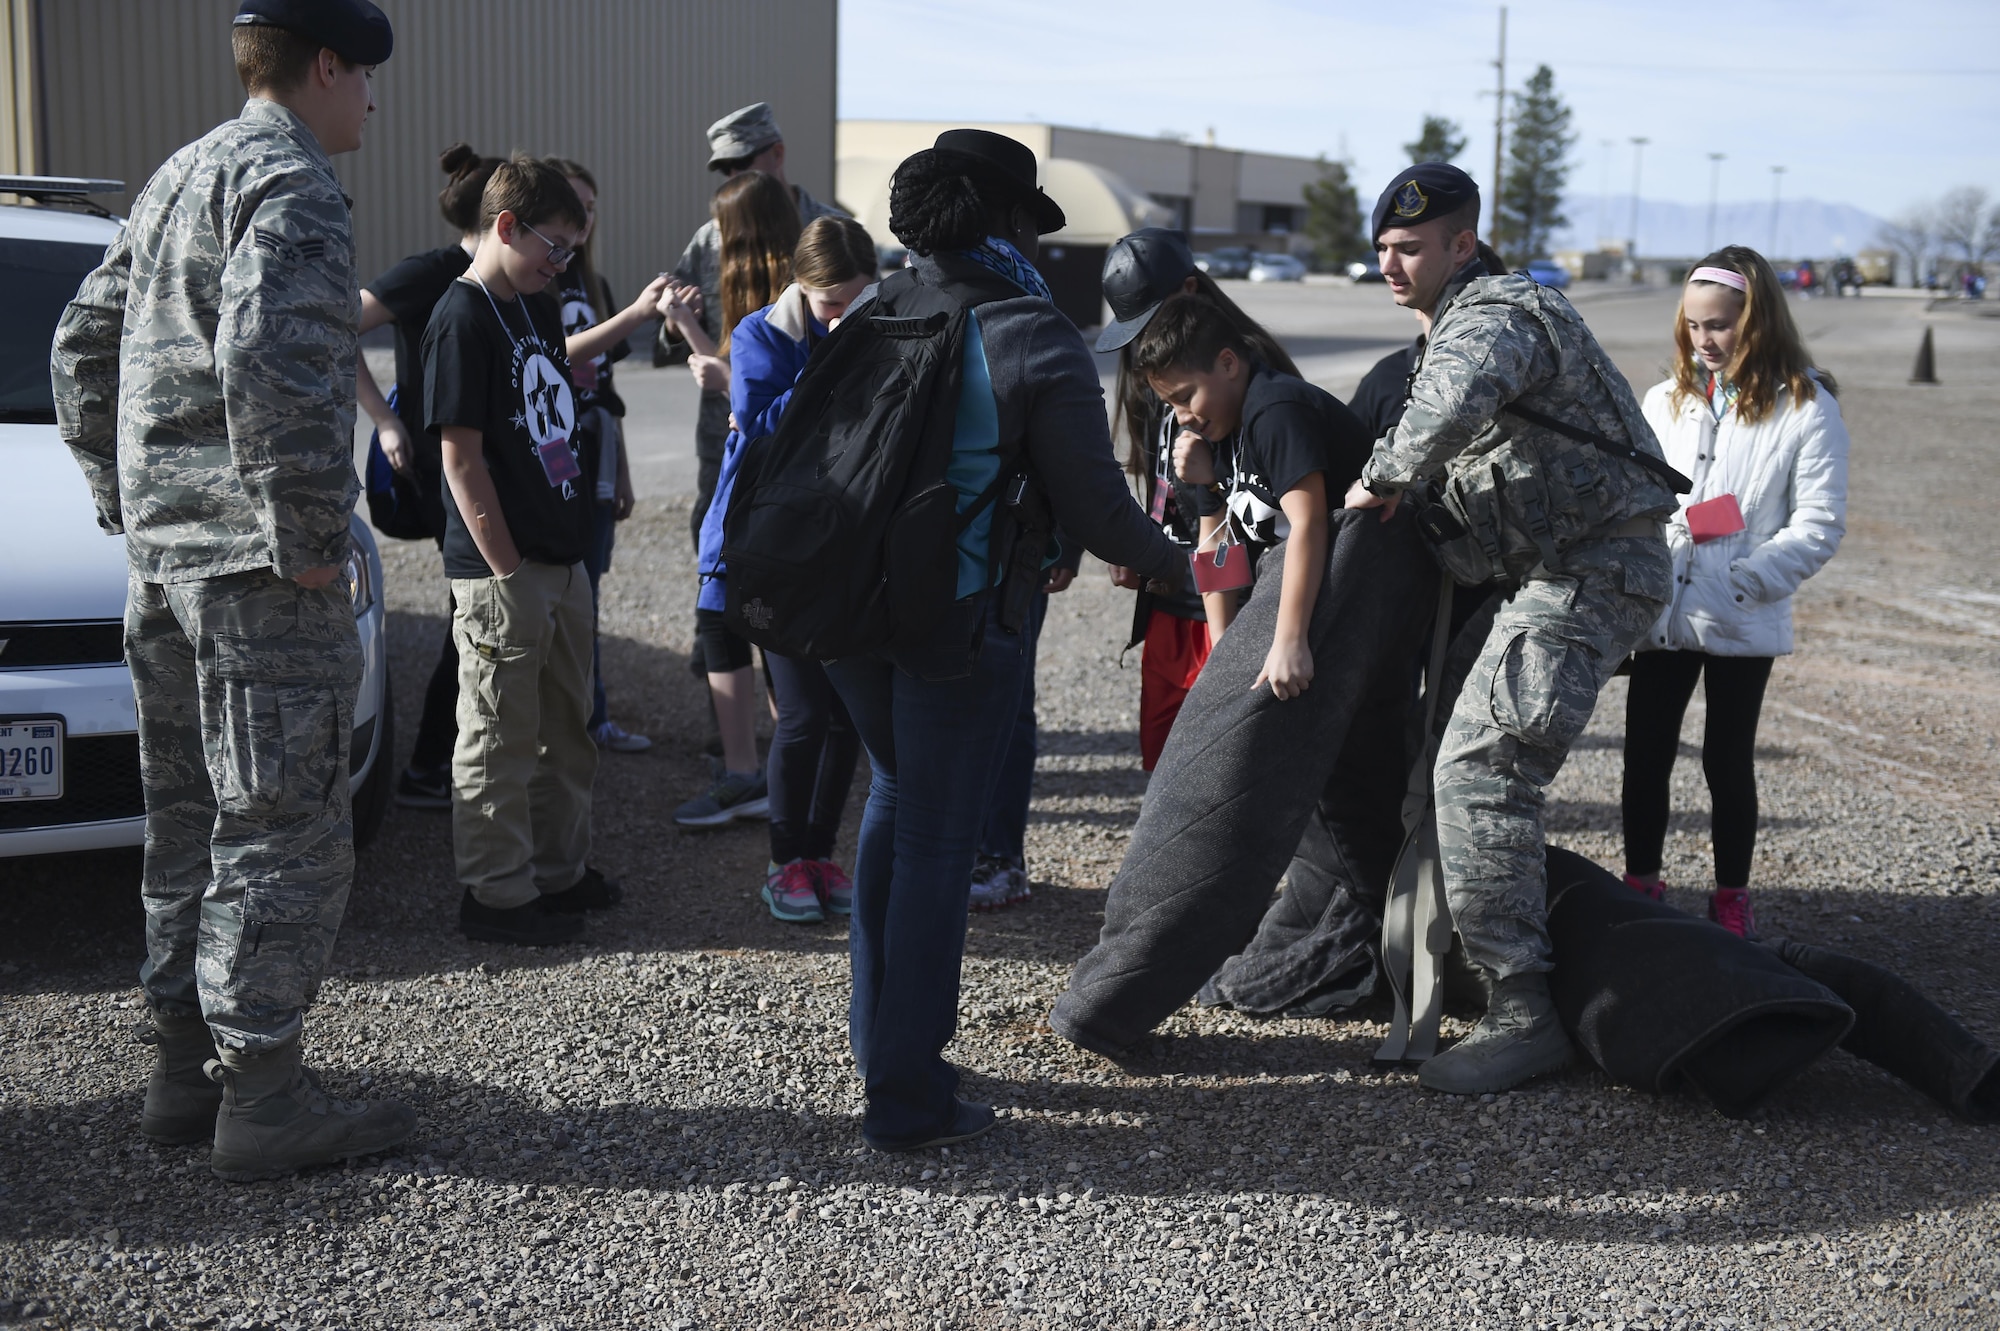 A group of children take turns wearing the bite suit with help from the 49th Security Forces Squadron Military Working Dog team with during Operation Kids Investigating Deployment at Holloman Air Force Base, N.M., Feb. 3, 2017. Operation KID is an annual event allowing children of military members to acquire a better understanding of what their parent goes through prior to a deployment. Military children were given a walk around the Basic Expeditionary Airfield Resources compound to see a mock deployment site, a mission brief, painted their faces, tried on Mission Oriented Protective Posture gear, and learn about different equipment including the opportunity to see a robot demonstration from Holloman’s EOD unit. (U.S. Air Force photo by Staff Sgt. Stacy Jonsgaard)